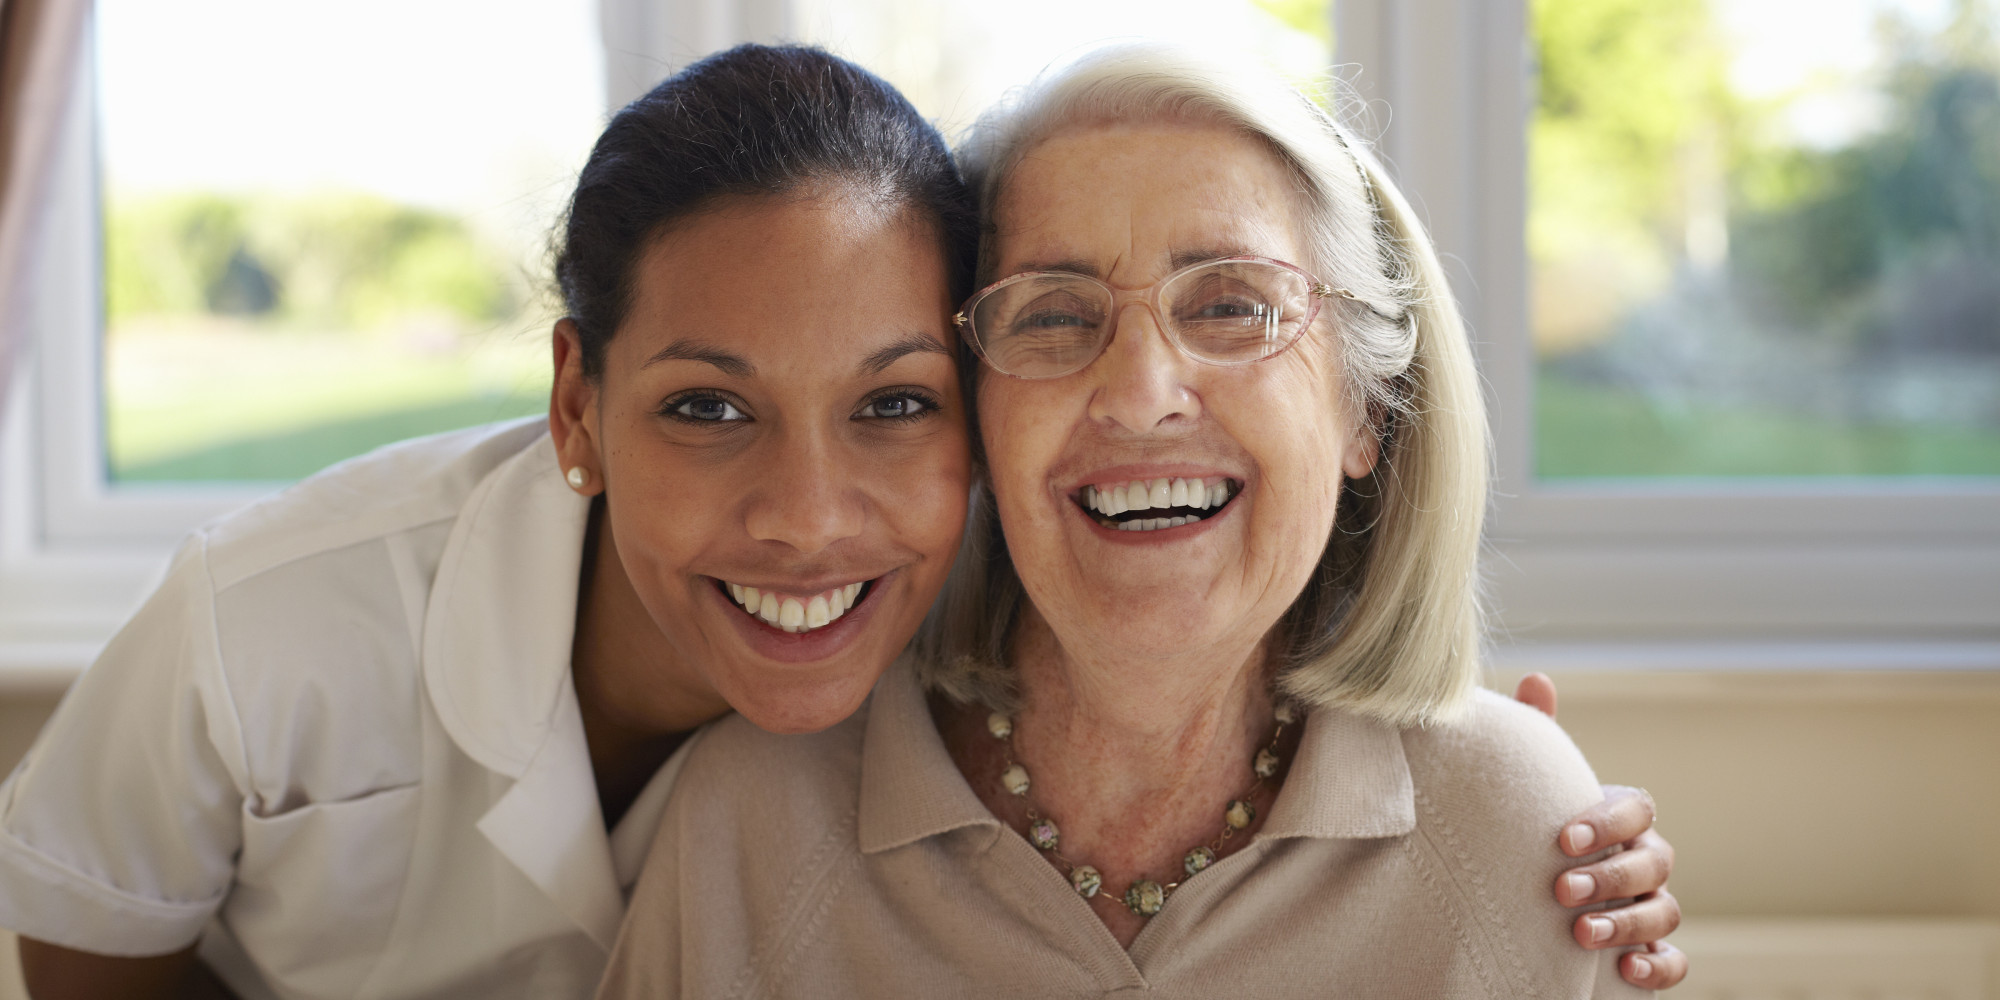 Home Health Aide Services | Nova Home Care & Staffing | New Jersey